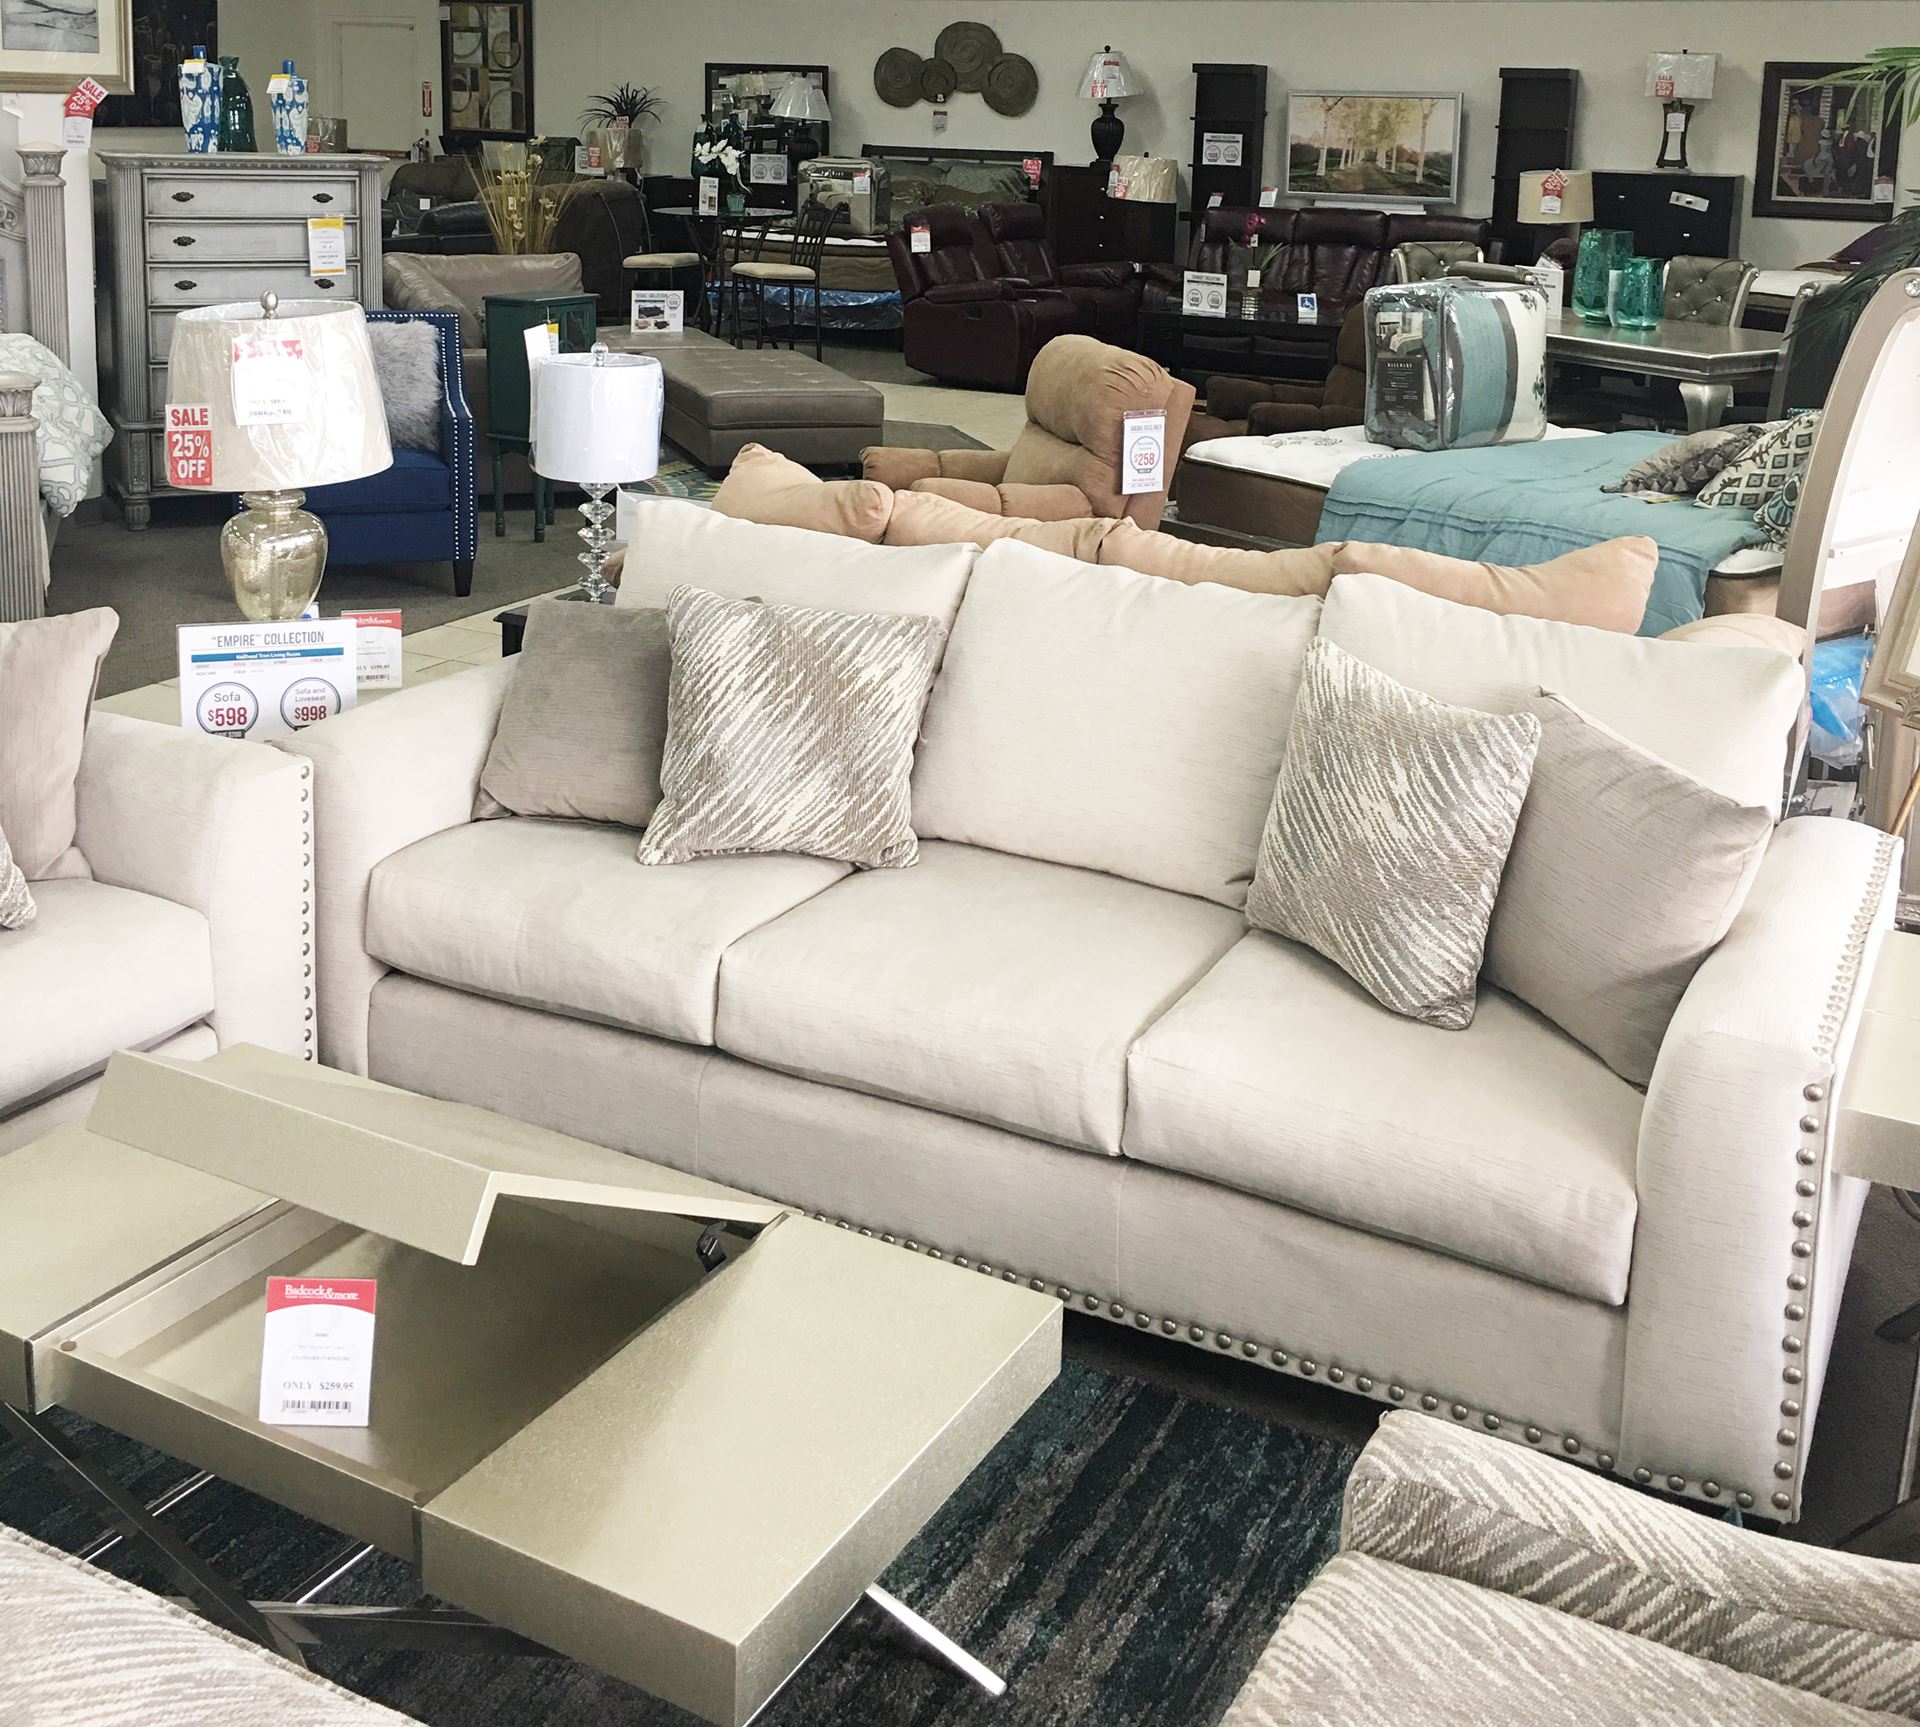 Hollywood Furniture Store Online Shopping For Every Room